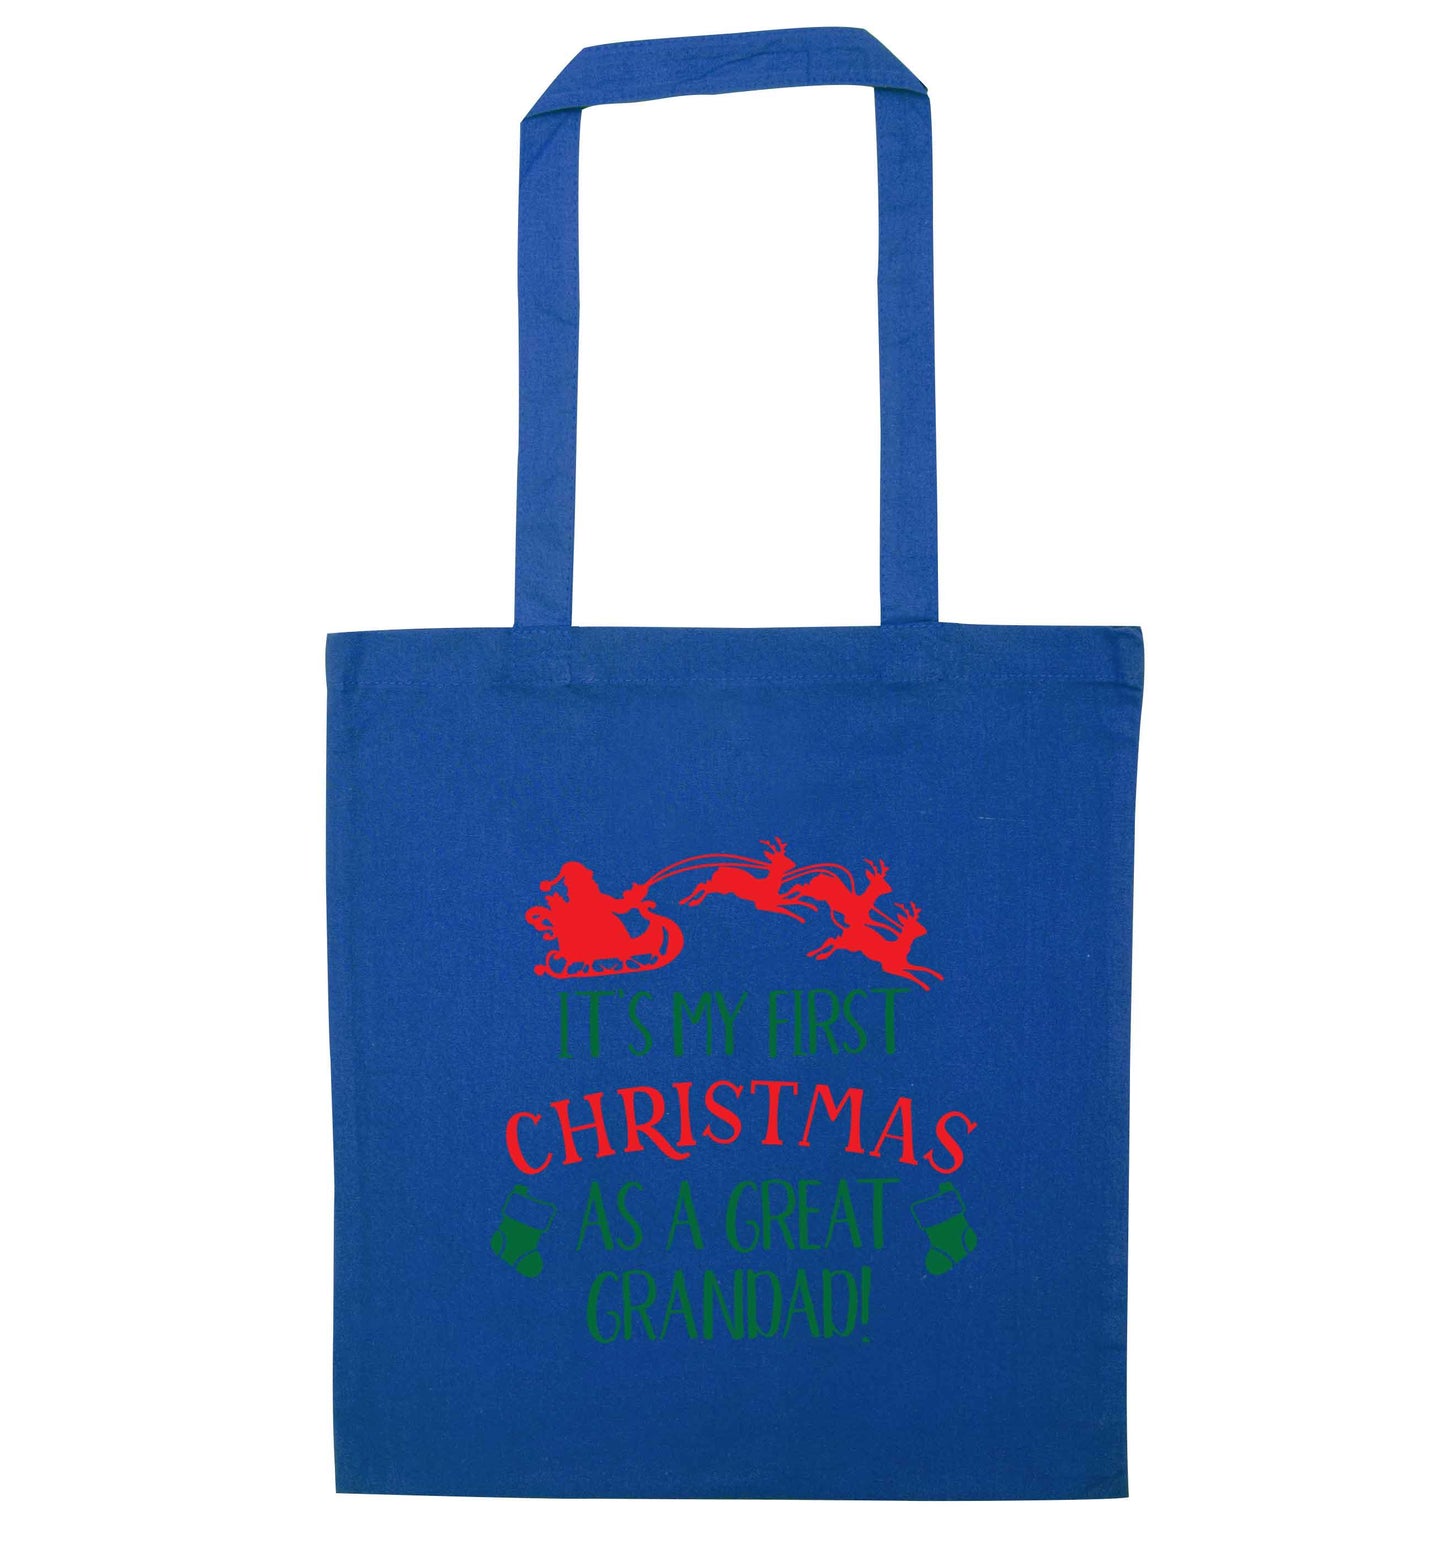 It's my first Christmas as a great grandad! blue tote bag